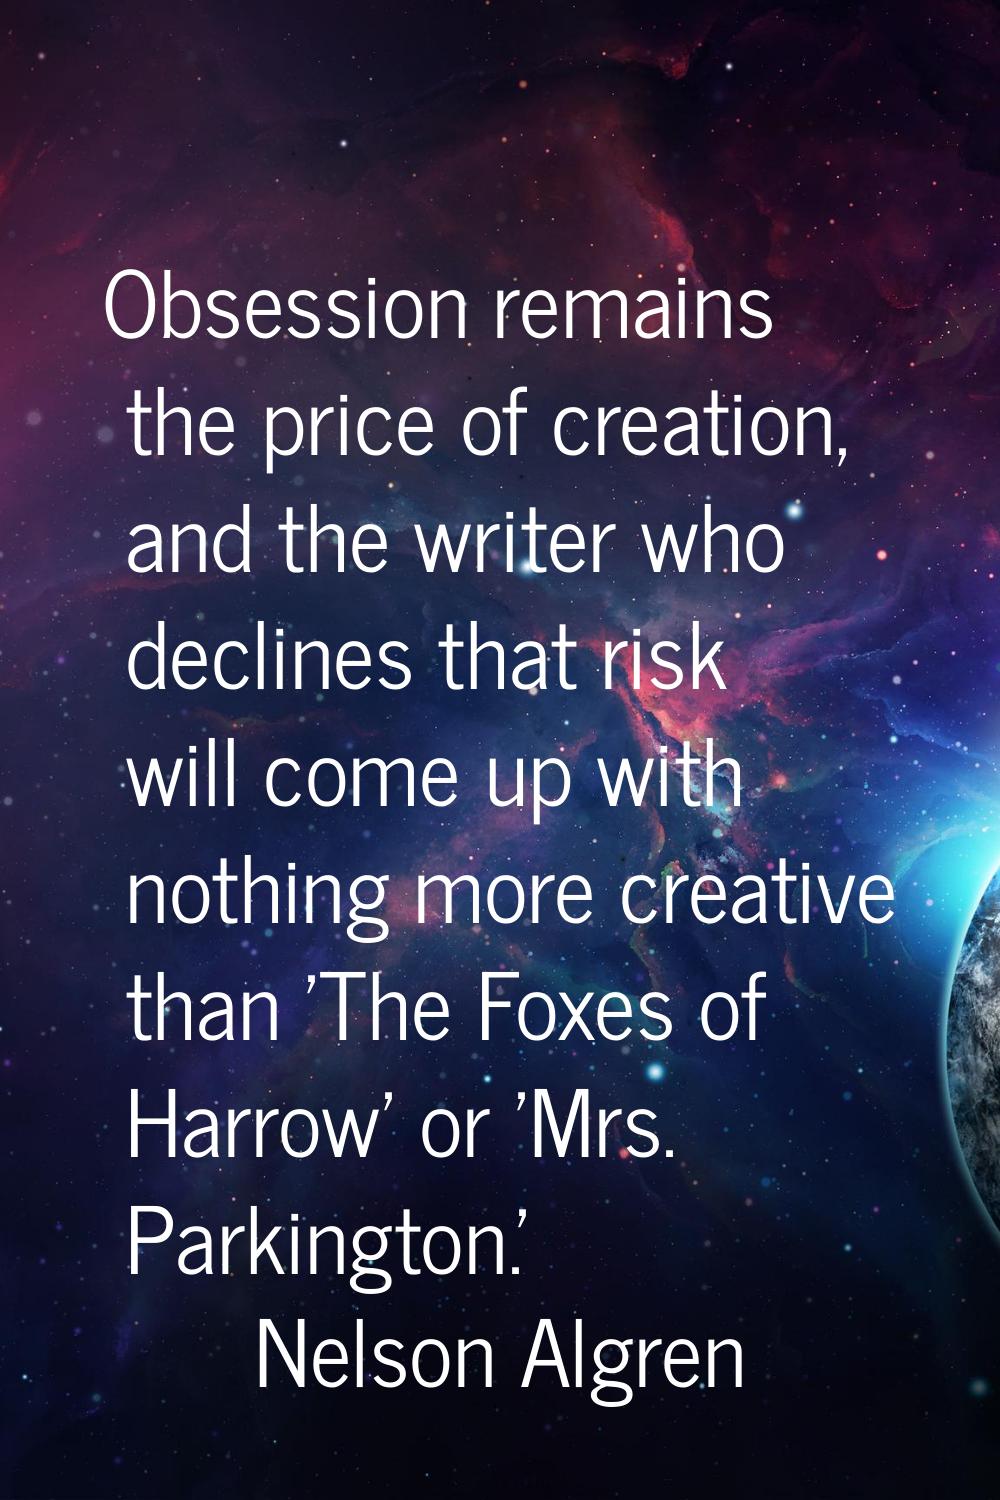 Obsession remains the price of creation, and the writer who declines that risk will come up with no